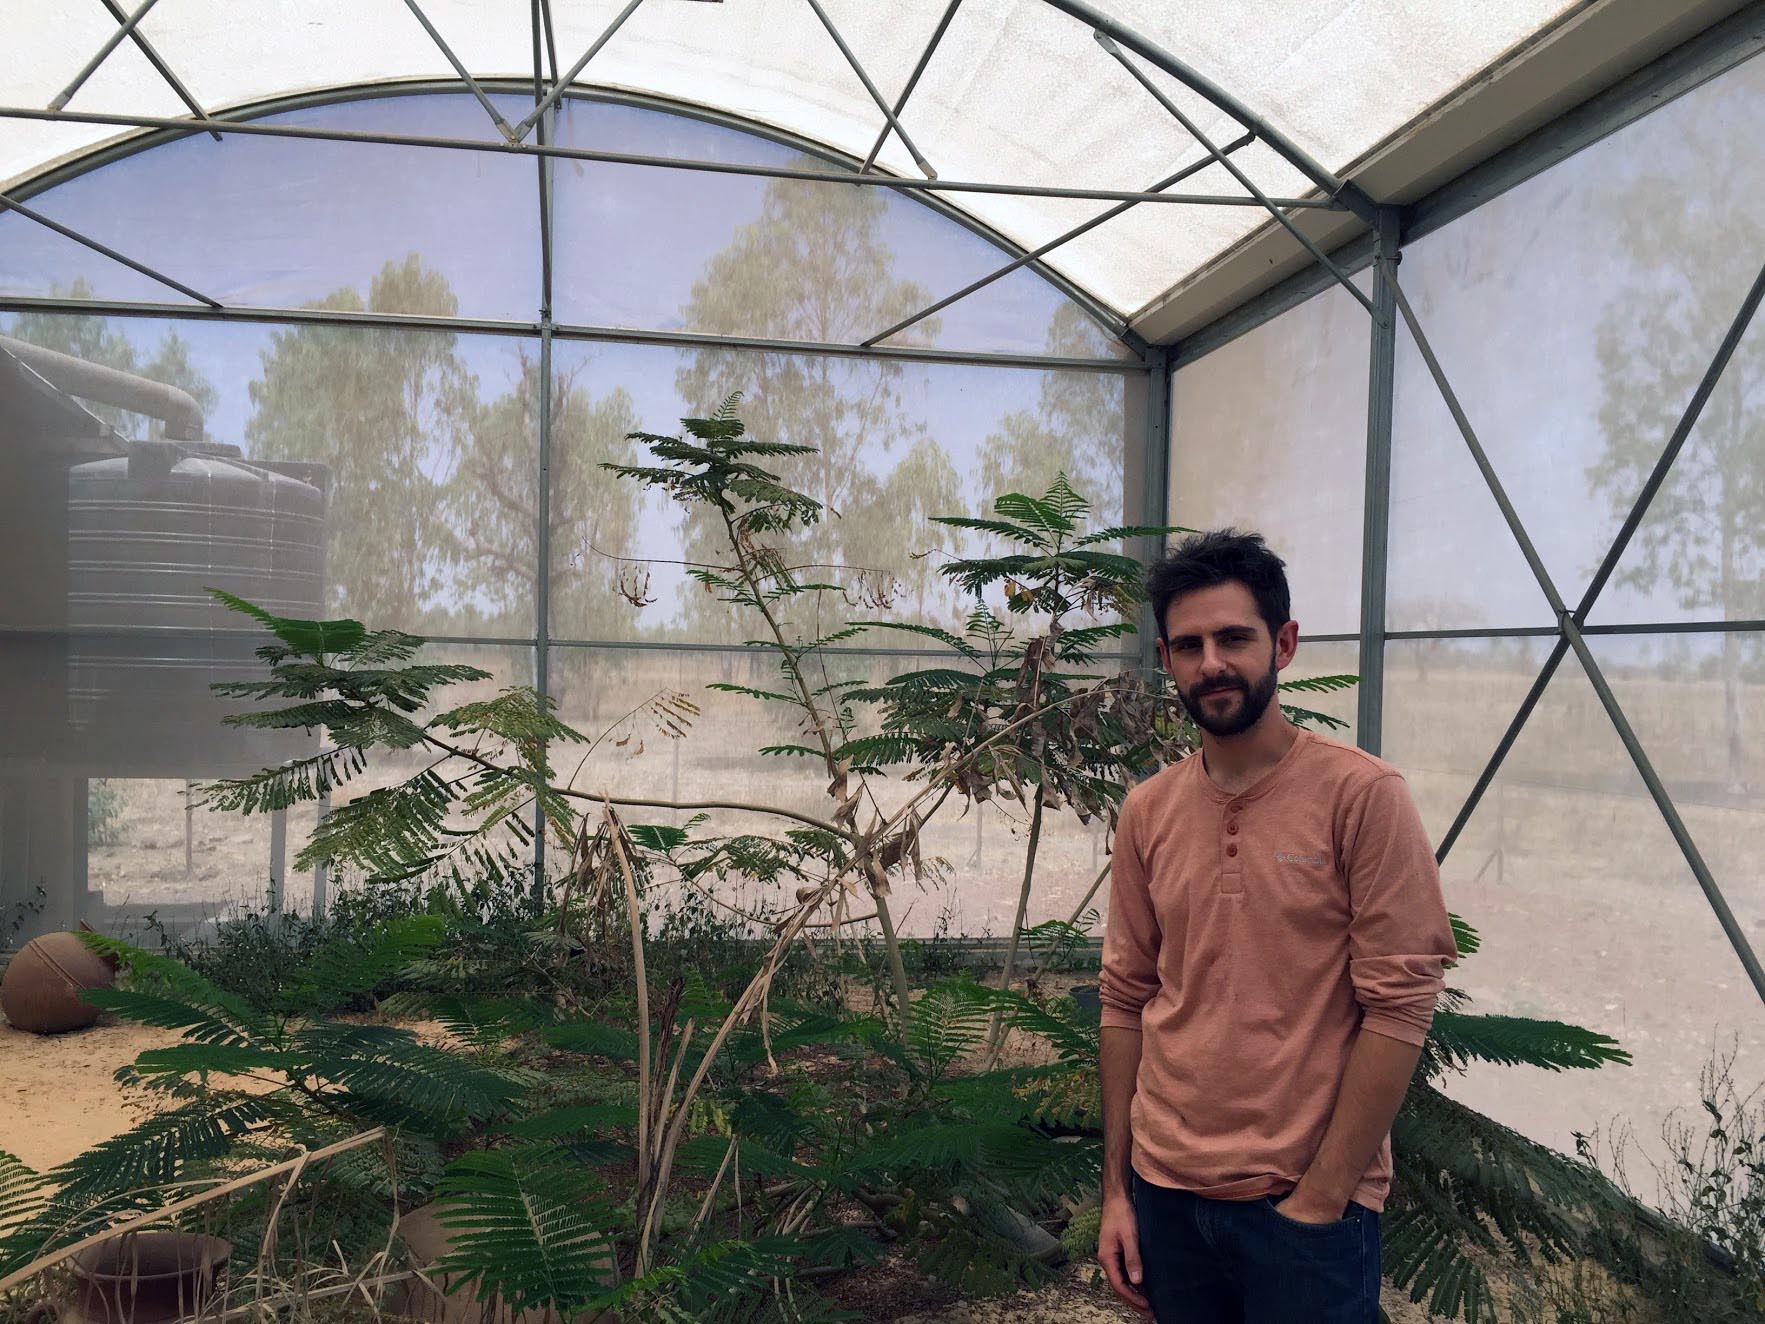  UMD Entomologist Brian Lovett, one of the lead authors of the 2019 AAAS Newcomb Cleveland Prize-winning paper, stands inside MosquitoSphere, a roughly 6,550 square-foot screened-in structure in Burkino Faso, built to simulate a village setting that includes plants, huts, small pools of water and a food source for mosquitos. Photo credit: Etienne Bilgo (Click image to download hi-res version.)